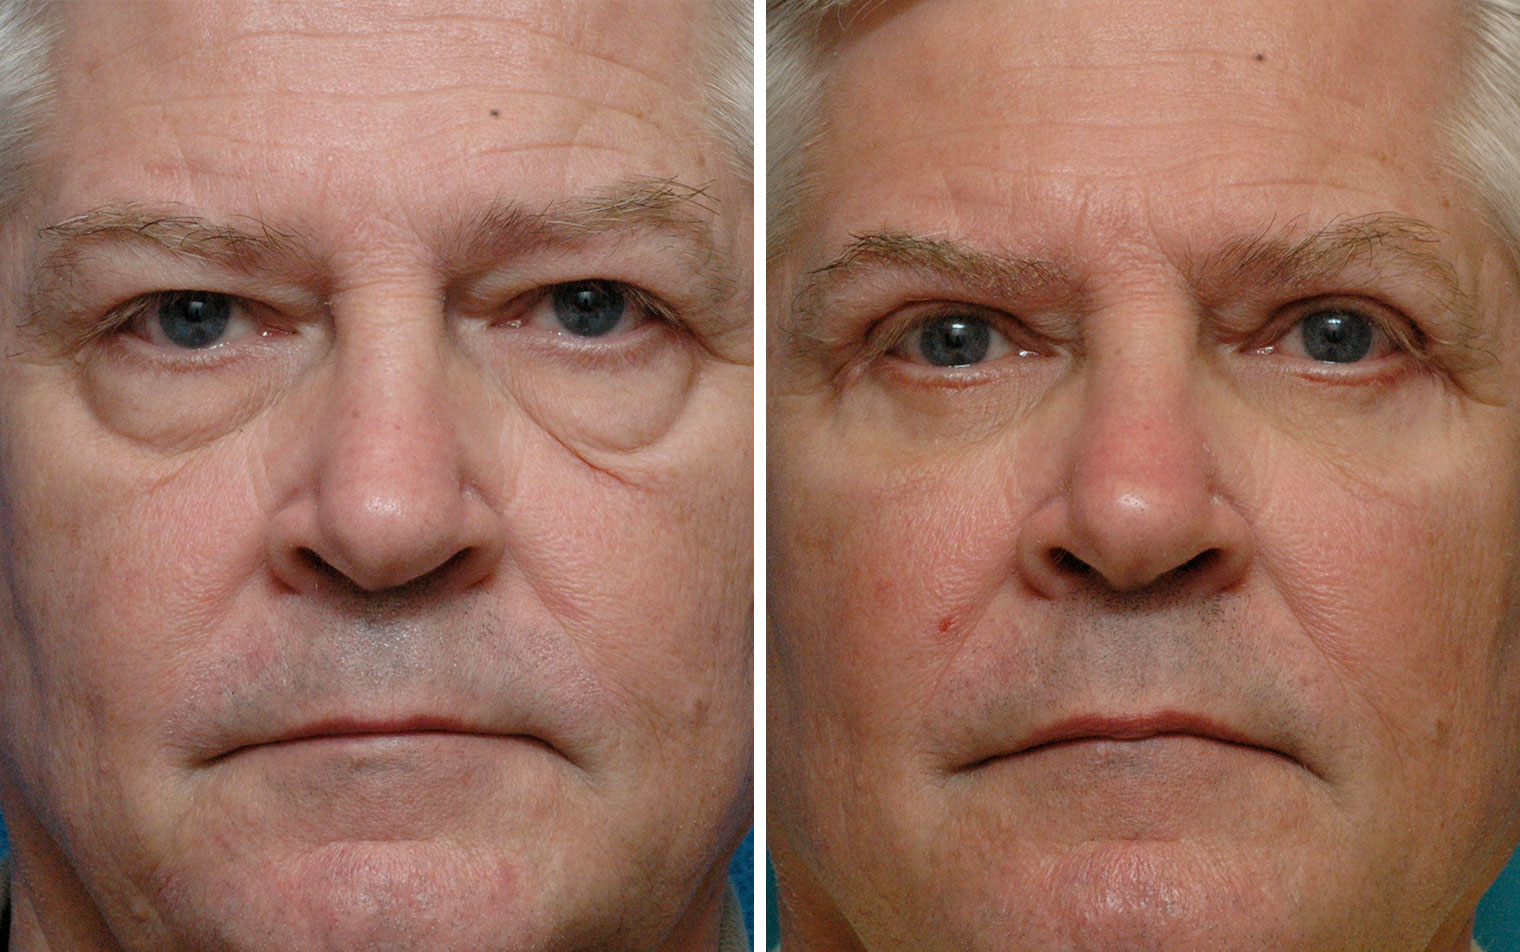 Lower Eyelid Pictures After Surgery 25